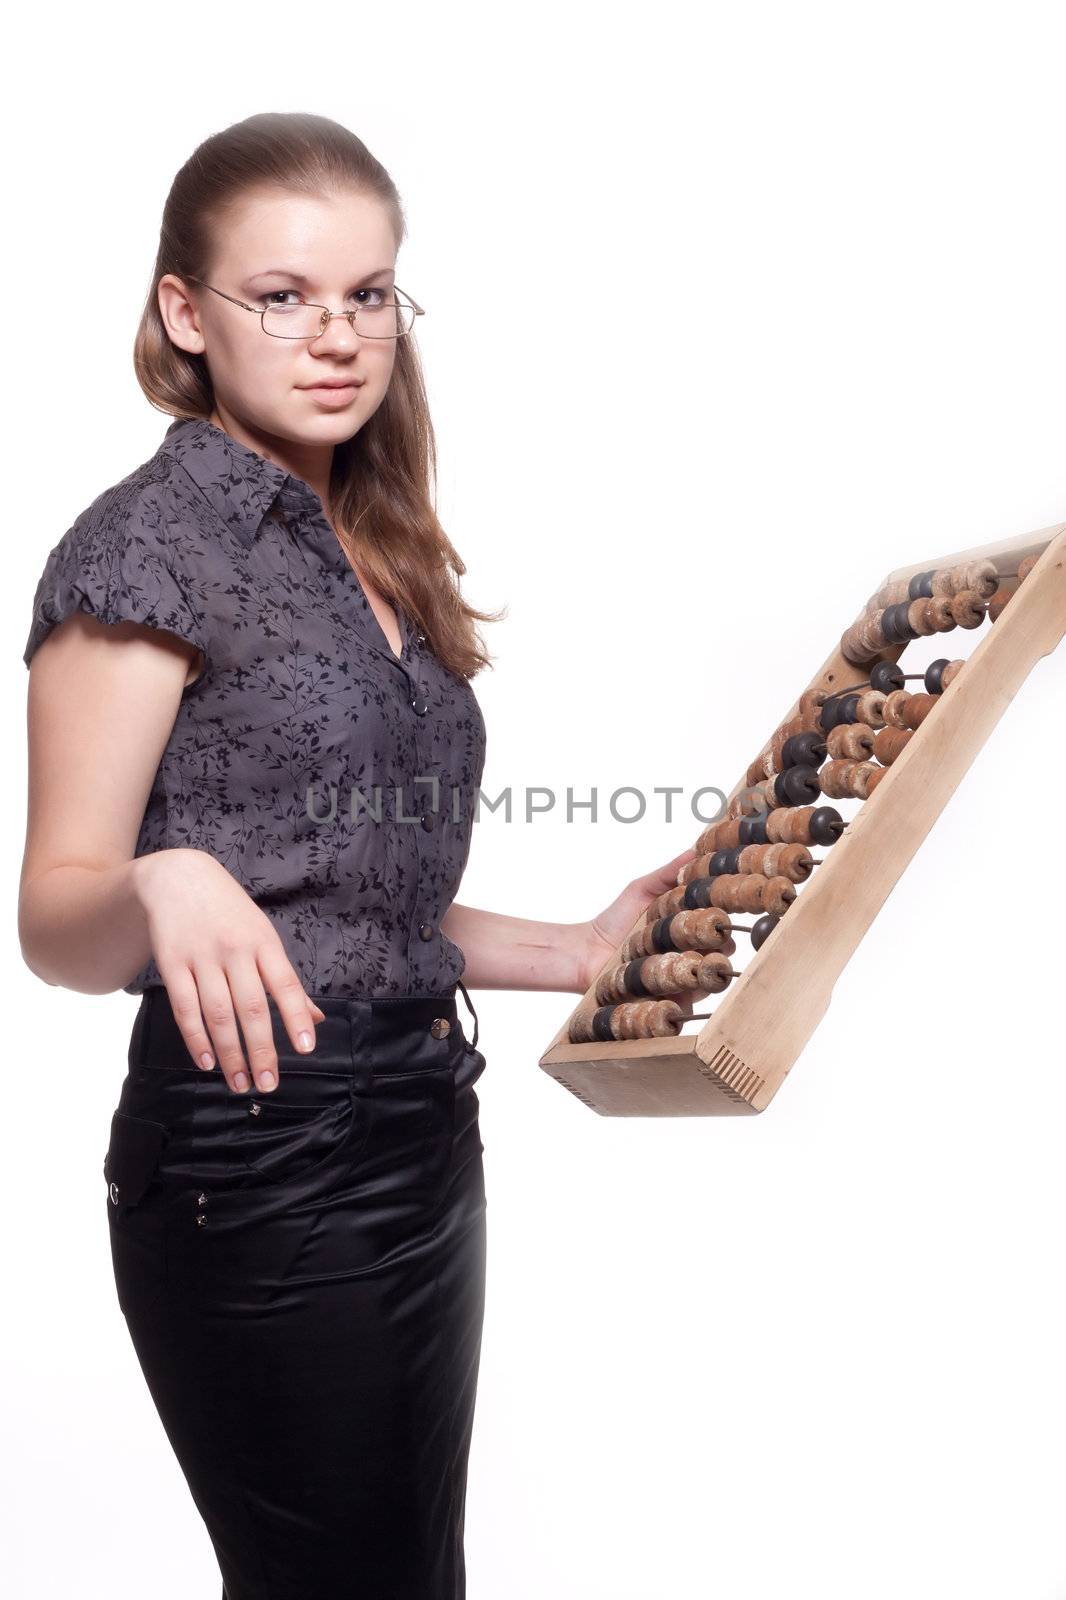 Girl with big wooden abacus on a white background